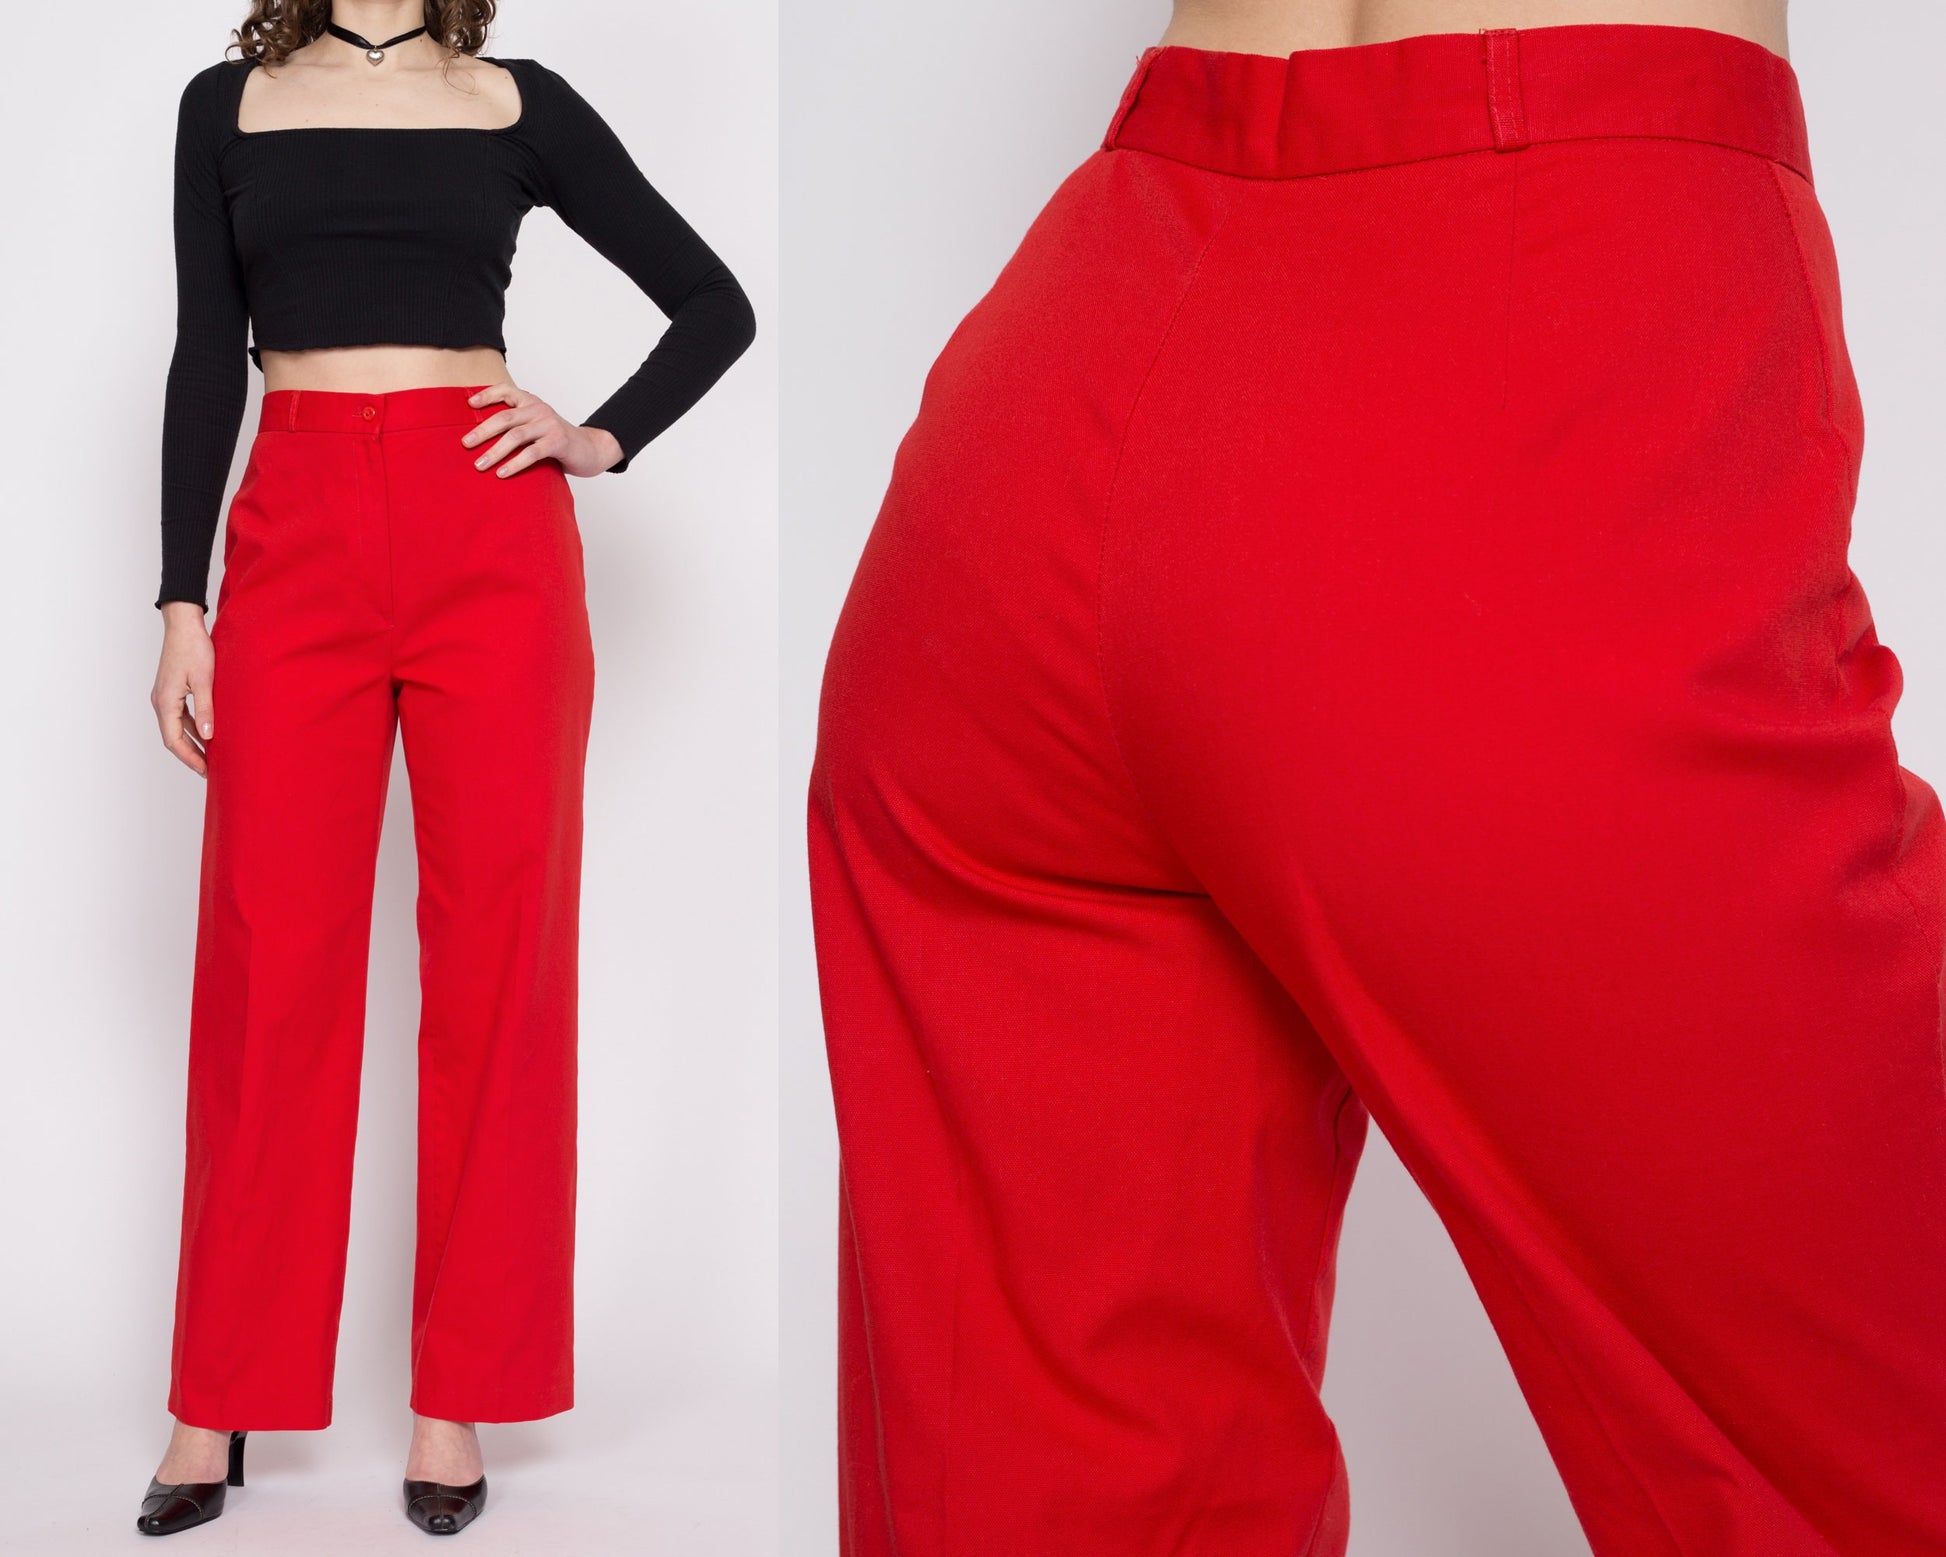  High Waisted Red Pants